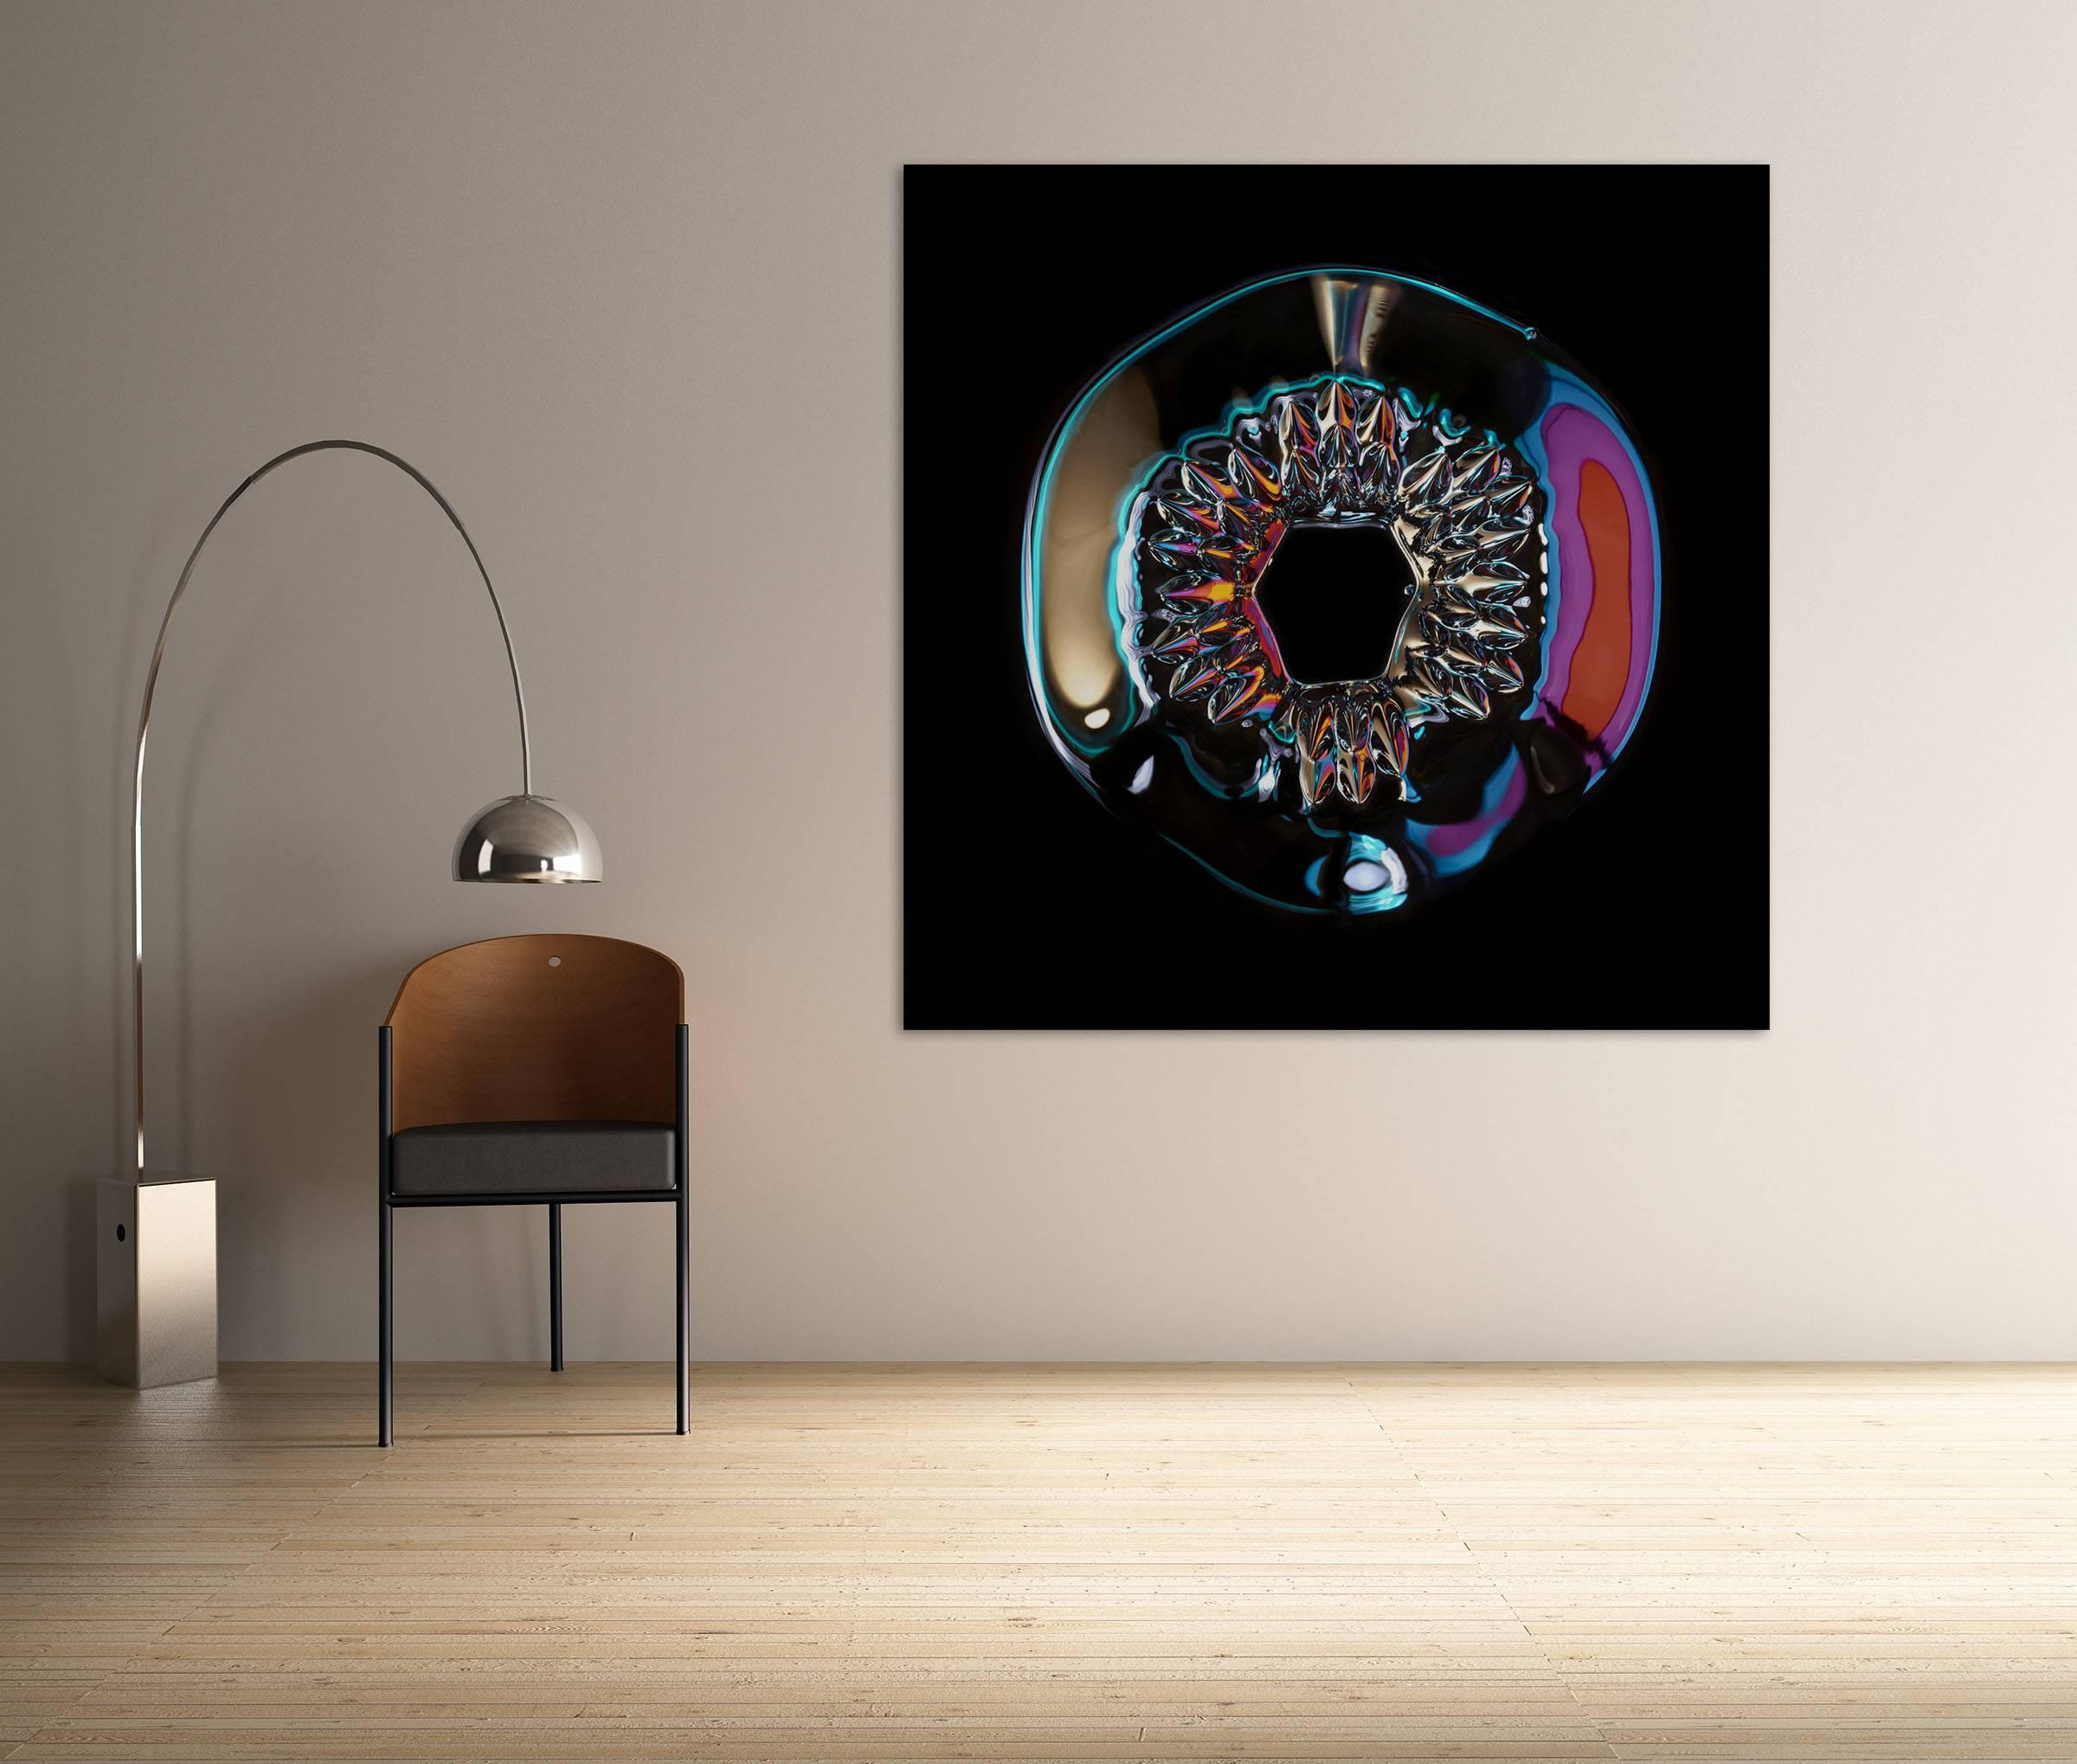 Magnetic radiation 11 (Abstract Photography)

Chromogenic print. Edition 1/5.

In his Magnetic radiation series, Janiak reveals the hidden world of magnetism by photographing ferrofluids. A ferrofluid is a liquid substance magnetized through the